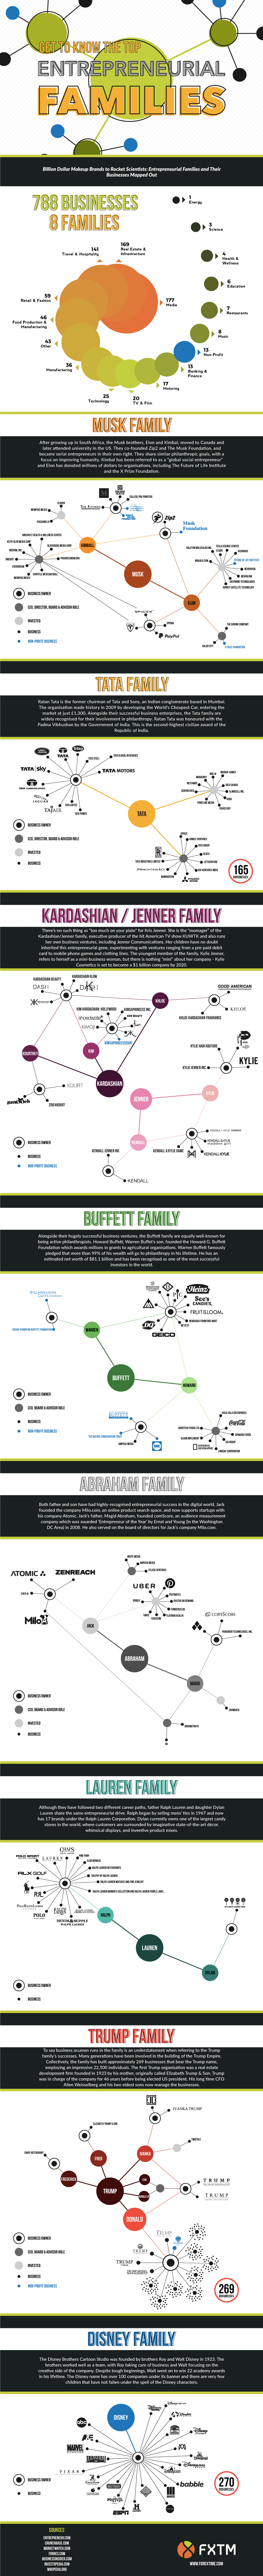 Entrepreneurs and their family businesses